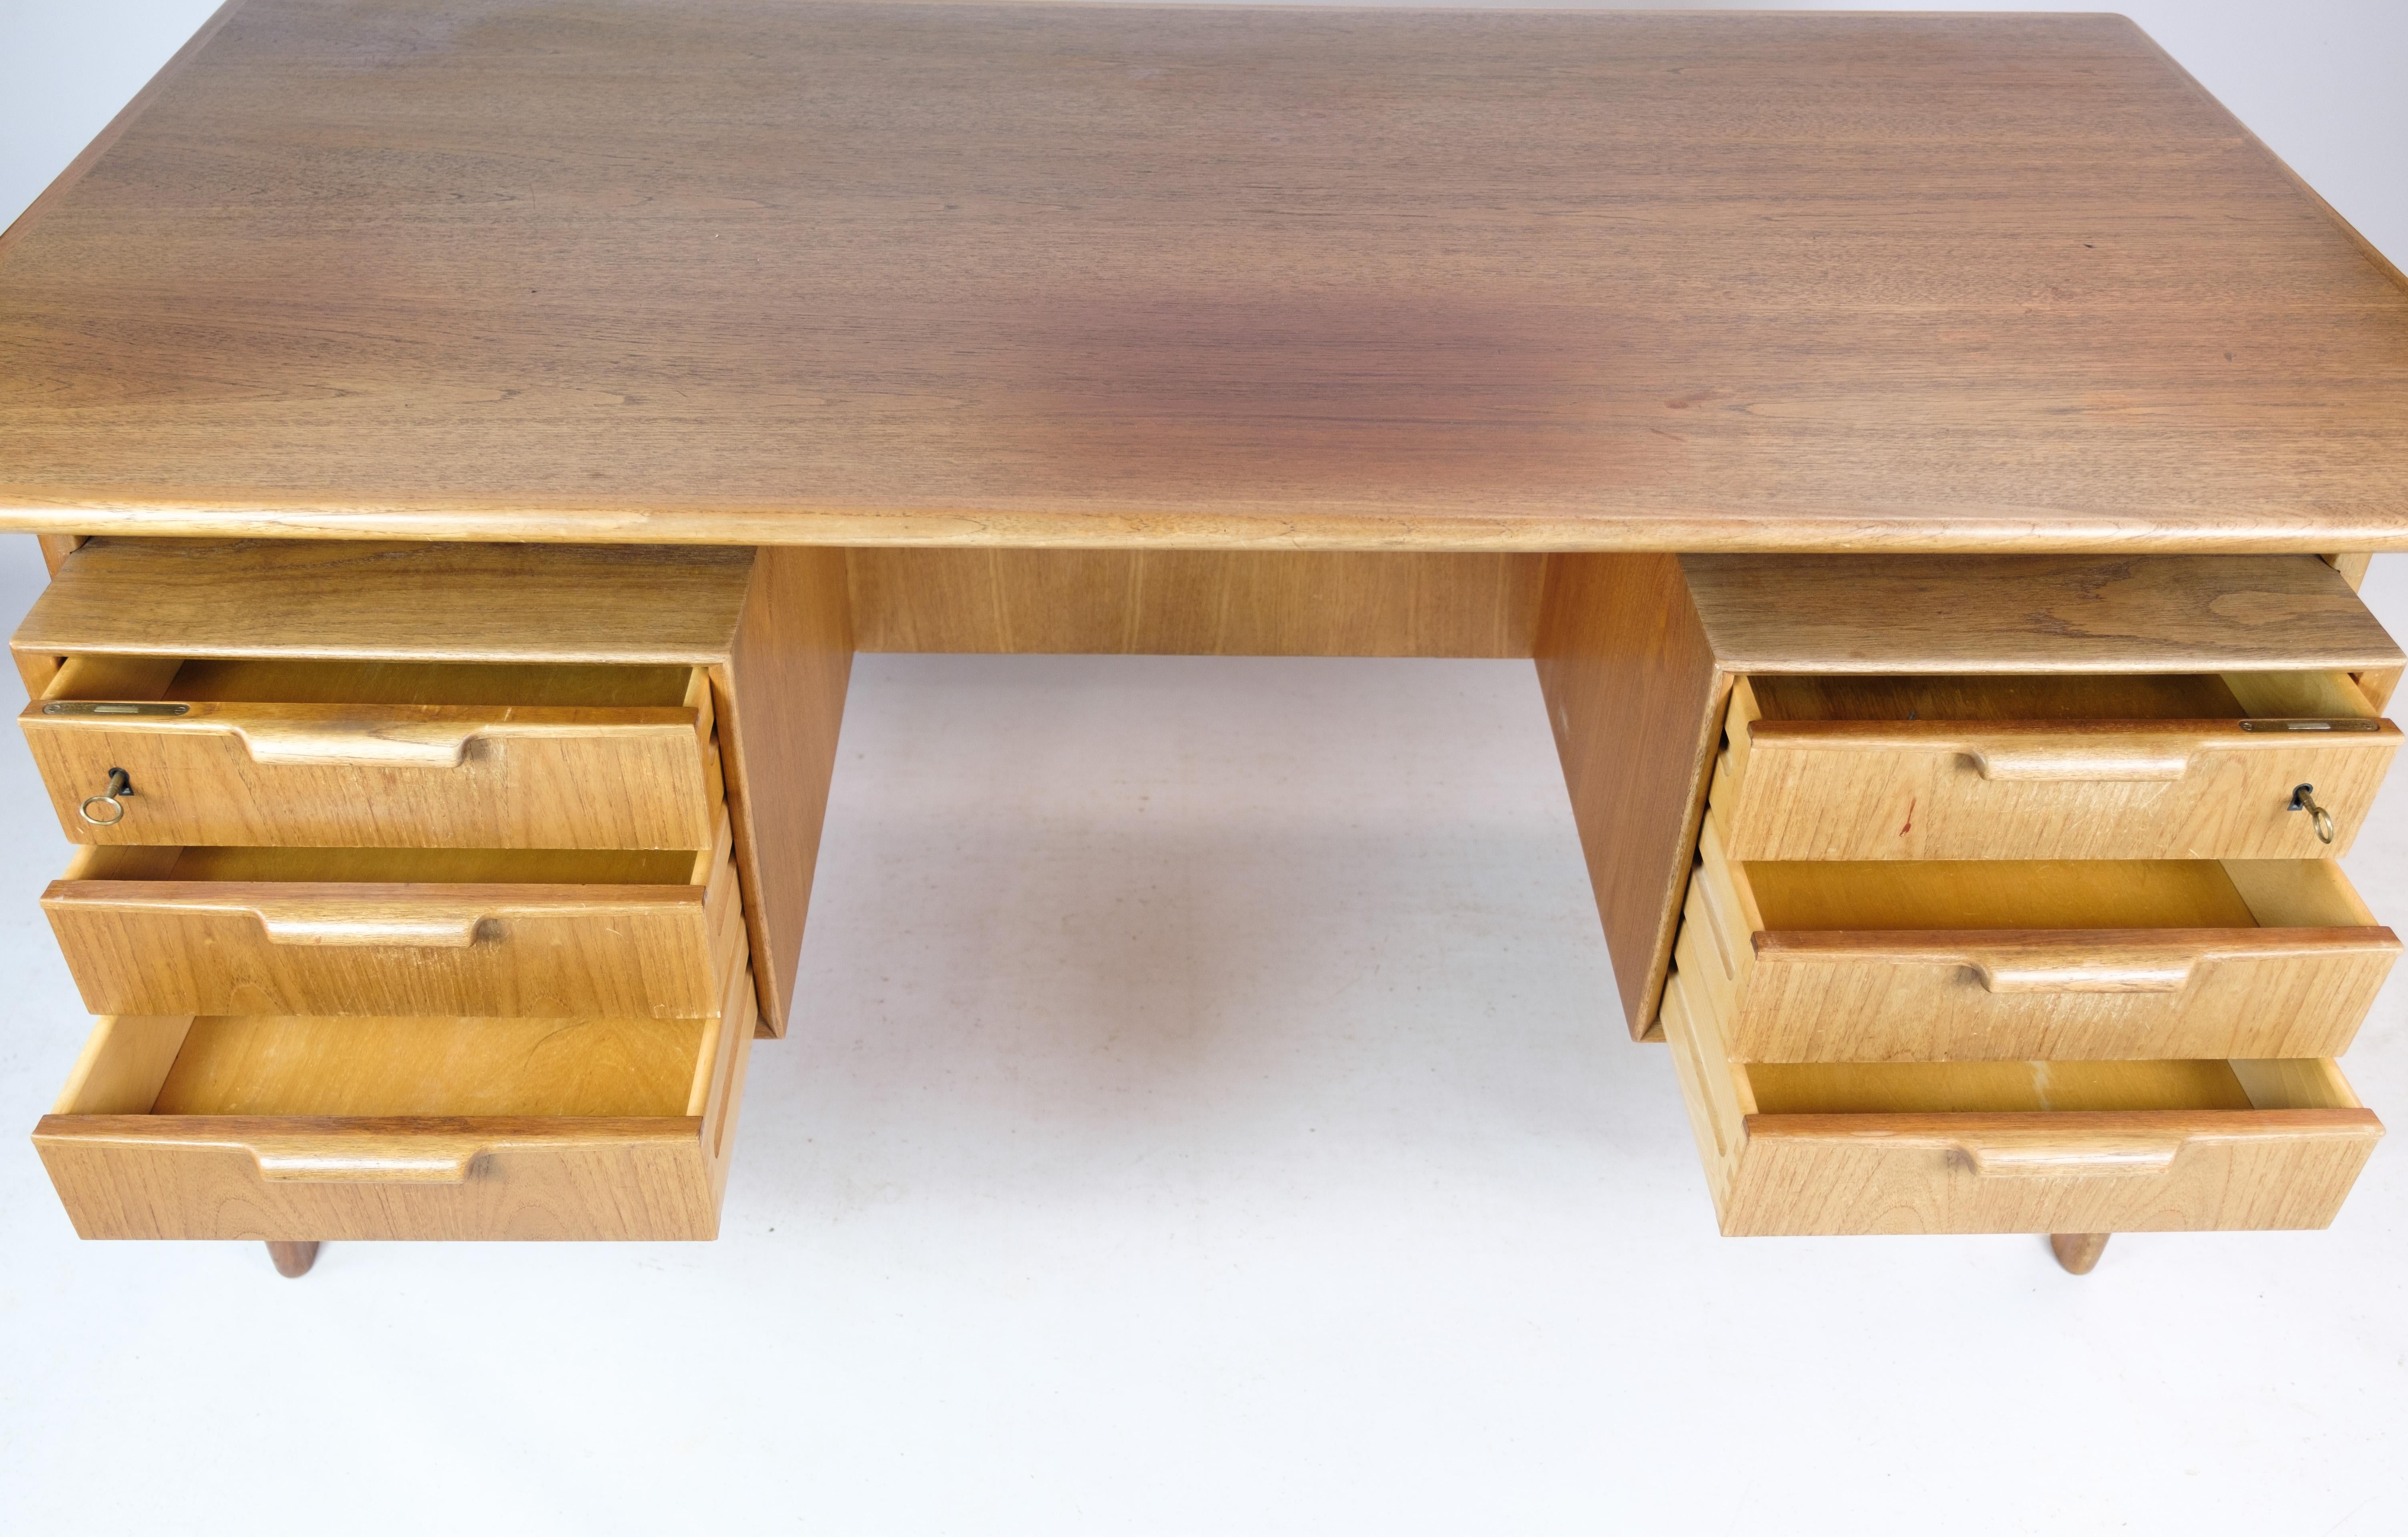 Model 75 desk, a timeless piece designed by Gunni Omann and crafted by Omann Junior Møbelfabrik around the 1960s. This desk is a testament to exquisite craftsmanship and design ingenuity. Made from incredibly beautiful light teak wood, it exudes